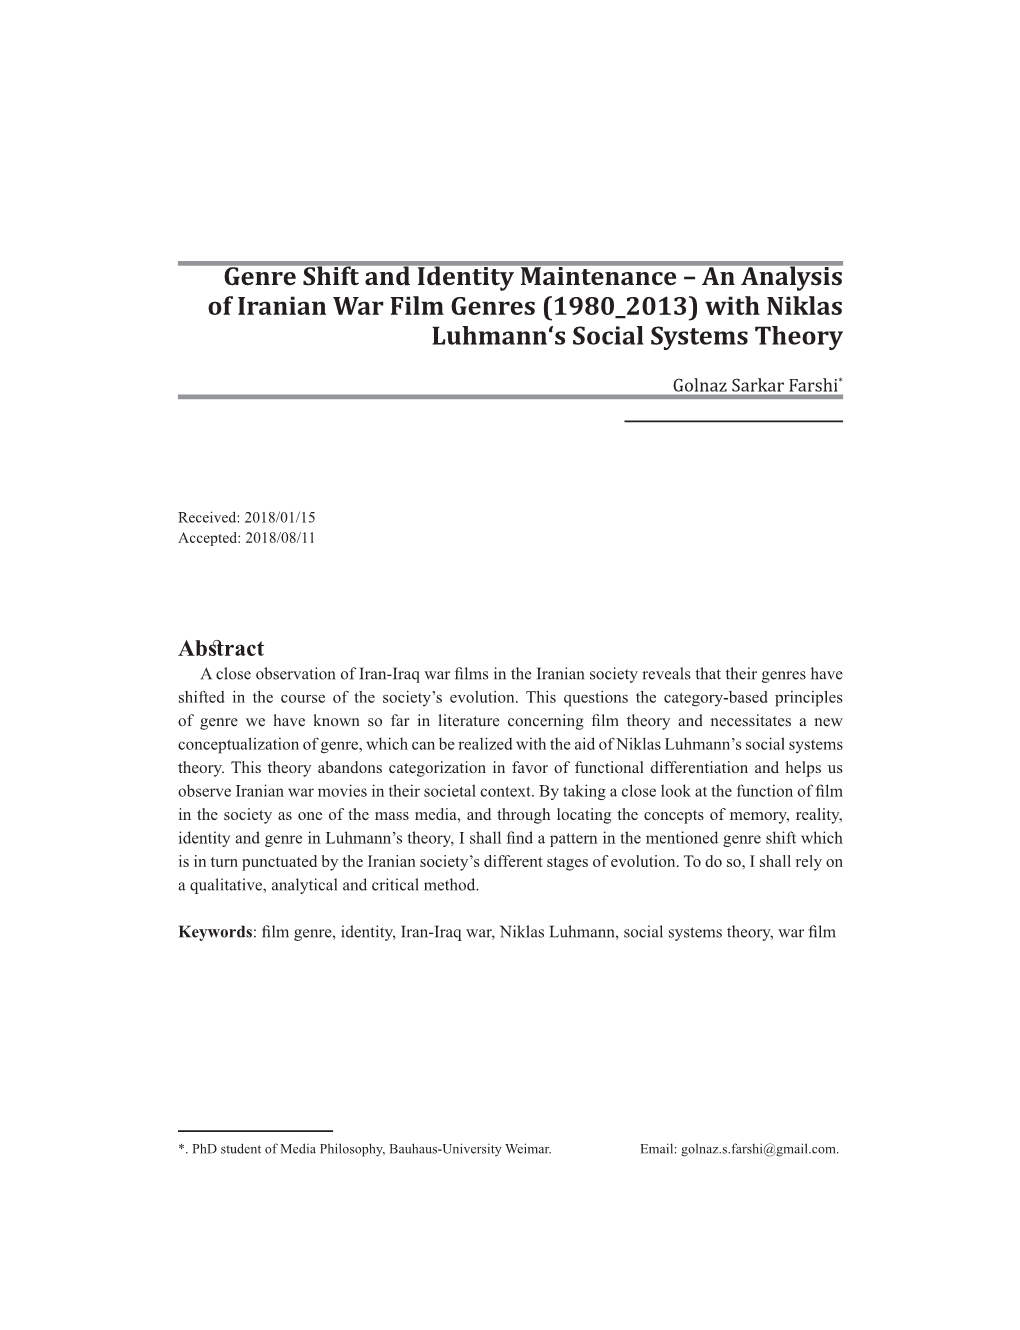 An Analysis of Iranian War Film Genres )1980 2013( with Niklas Luhmann’S Social Systems Theory